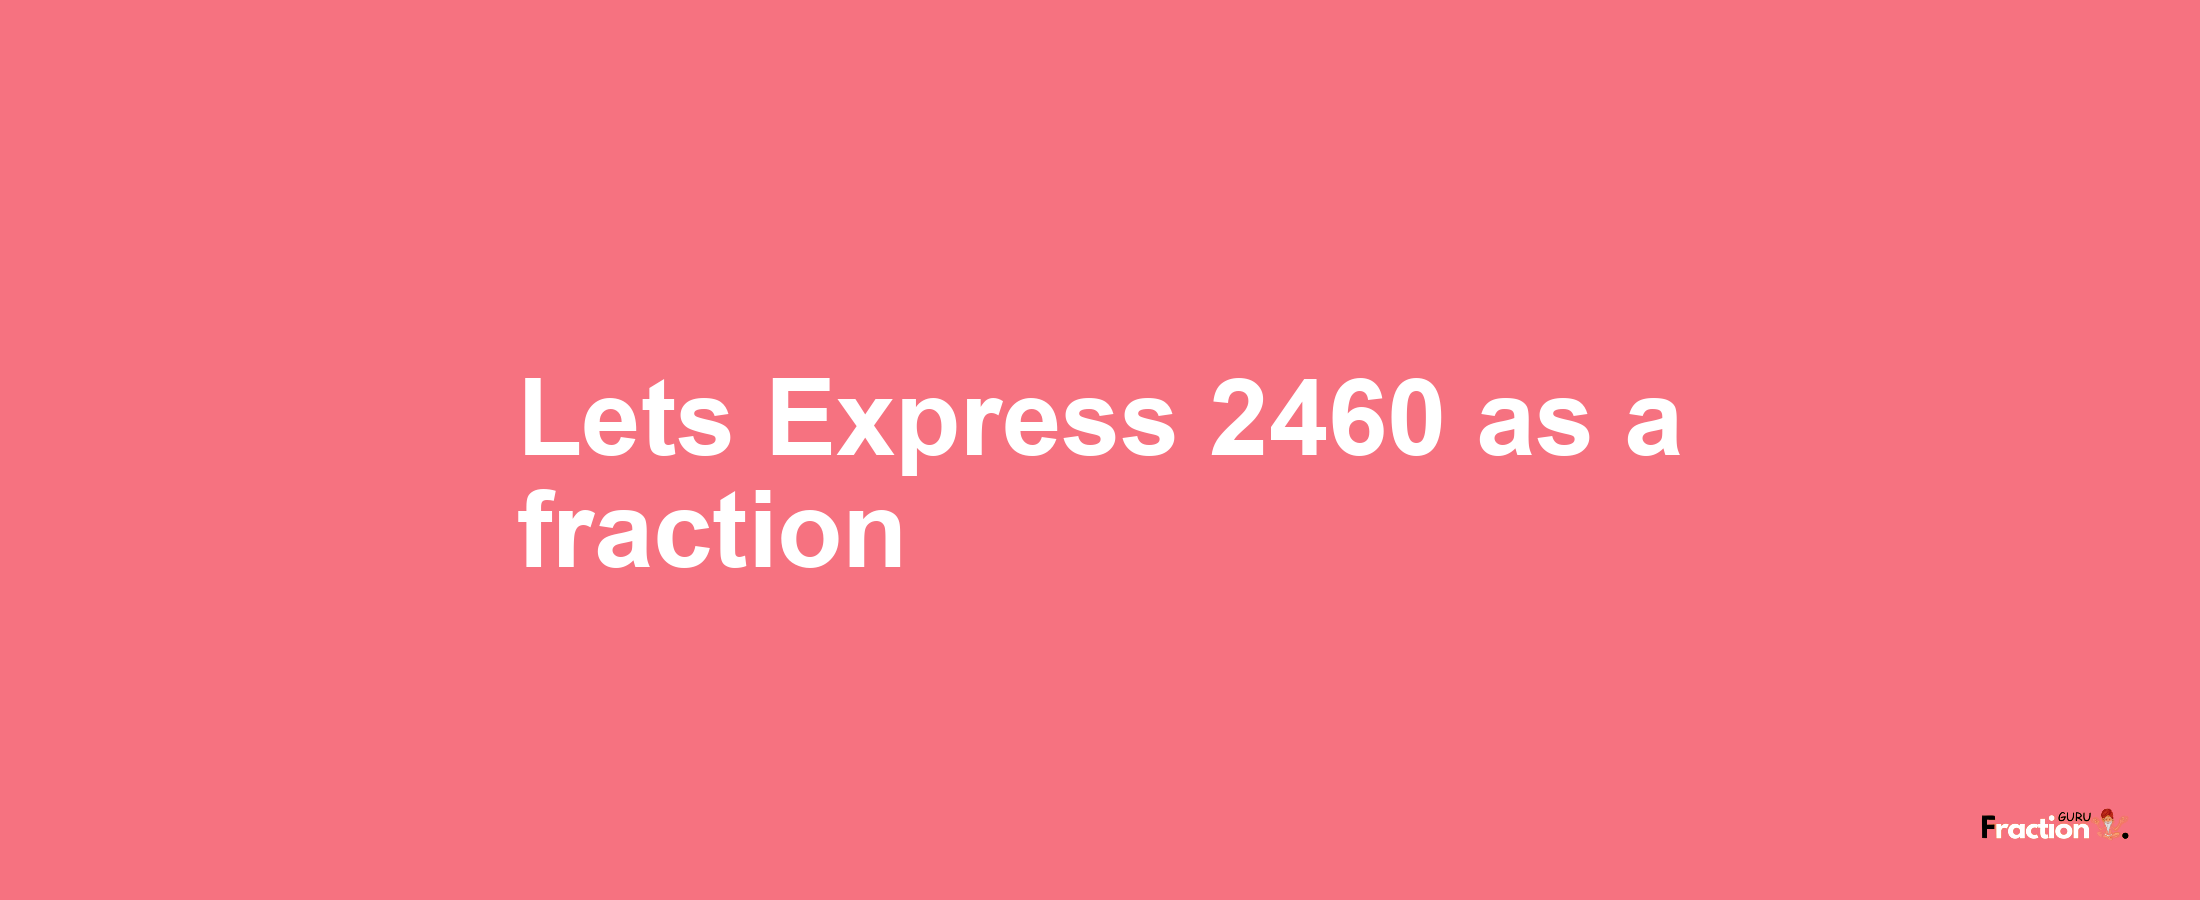 Lets Express 2460 as afraction